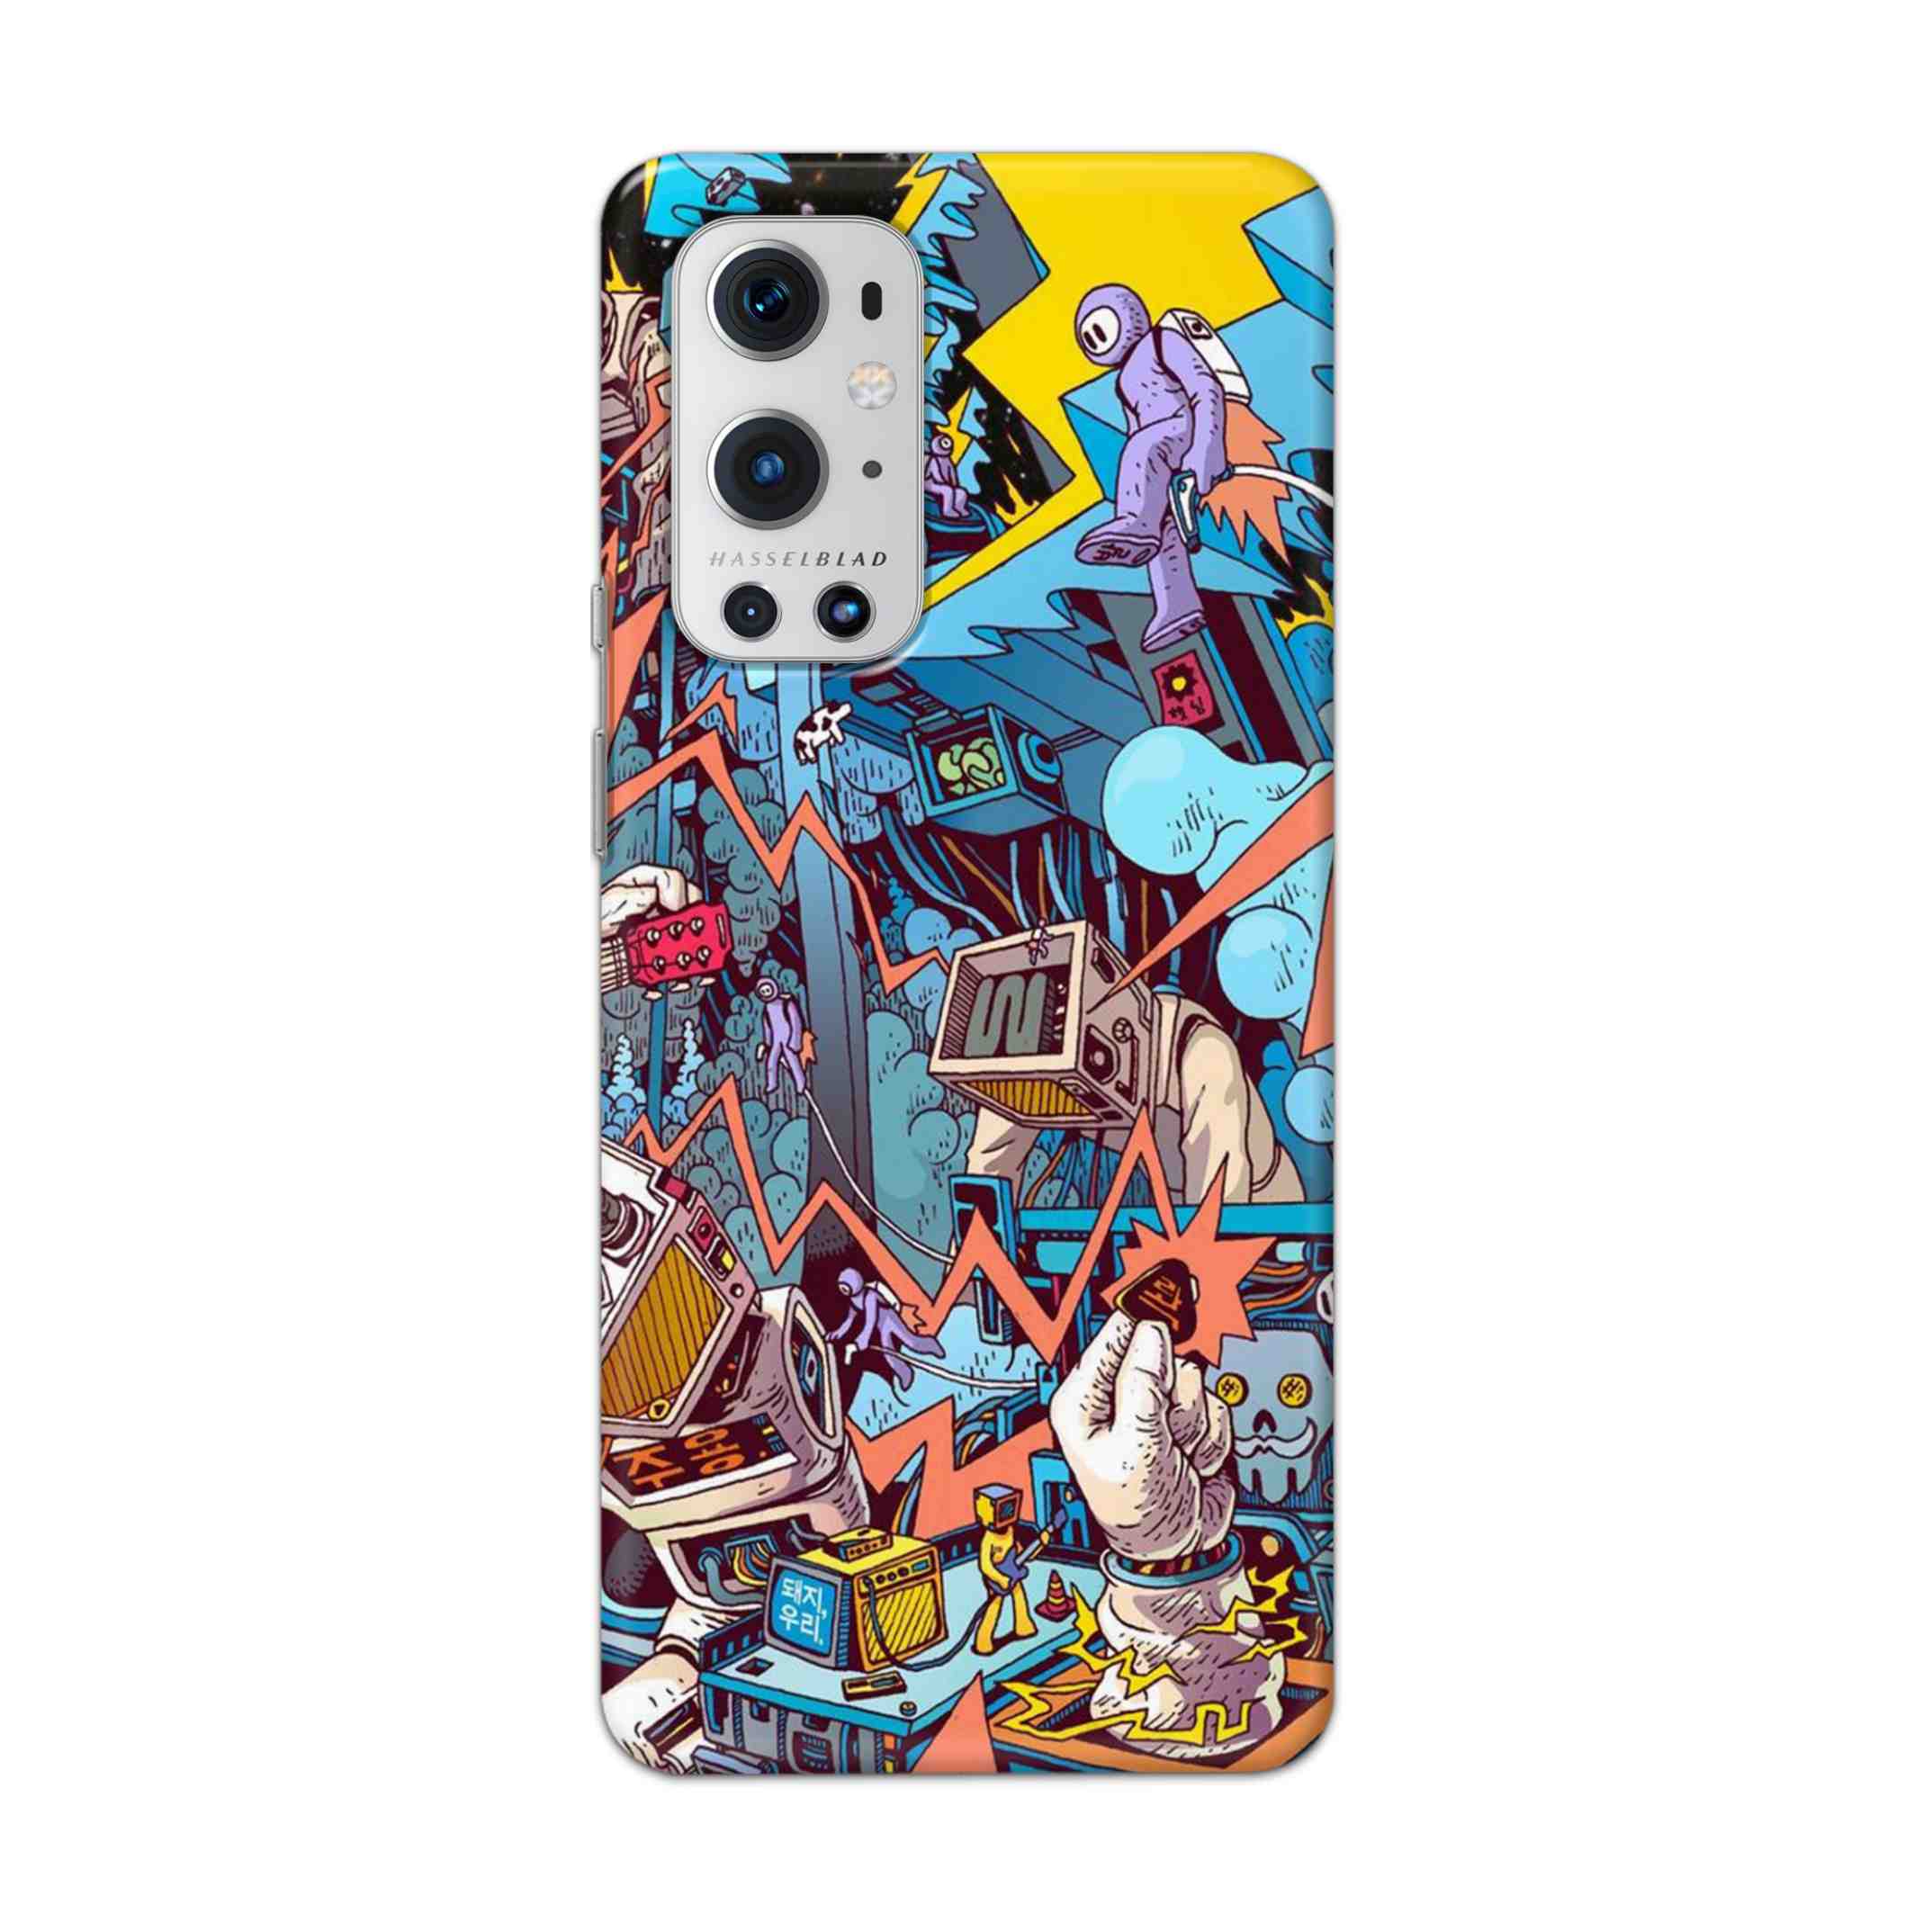 Buy Ofo Panic Hard Back Mobile Phone Case Cover For OnePlus 9 Pro Online